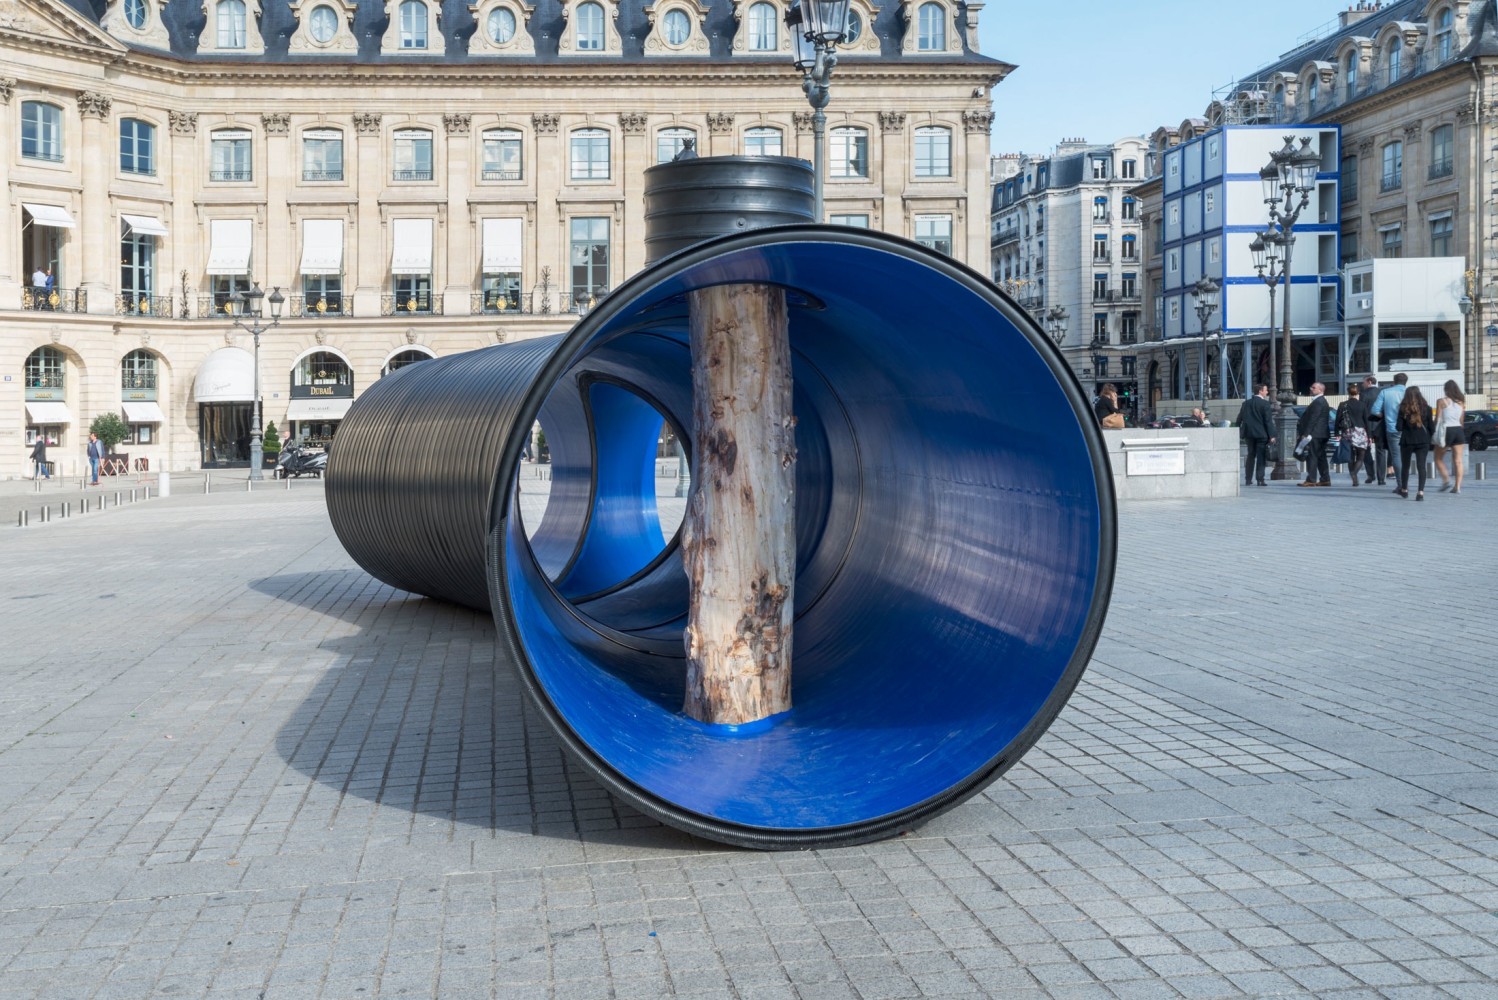 Oscar Tuazon
Life Prototype, 2017
One of four elements in&amp;nbsp;Une Colonne d&amp;#39;Eau, 2017
Thermoplastic hoses, tree trunks
105 2/3 x&amp;nbsp;82 3/4 x 341 inches
(268&amp;nbsp;x 210 x 989 cm)
Installation view
Place Vend&amp;ocirc;me, Paris&amp;nbsp;(October 16 &amp;ndash; November 9, 2017)
Photograph by Marc Domage